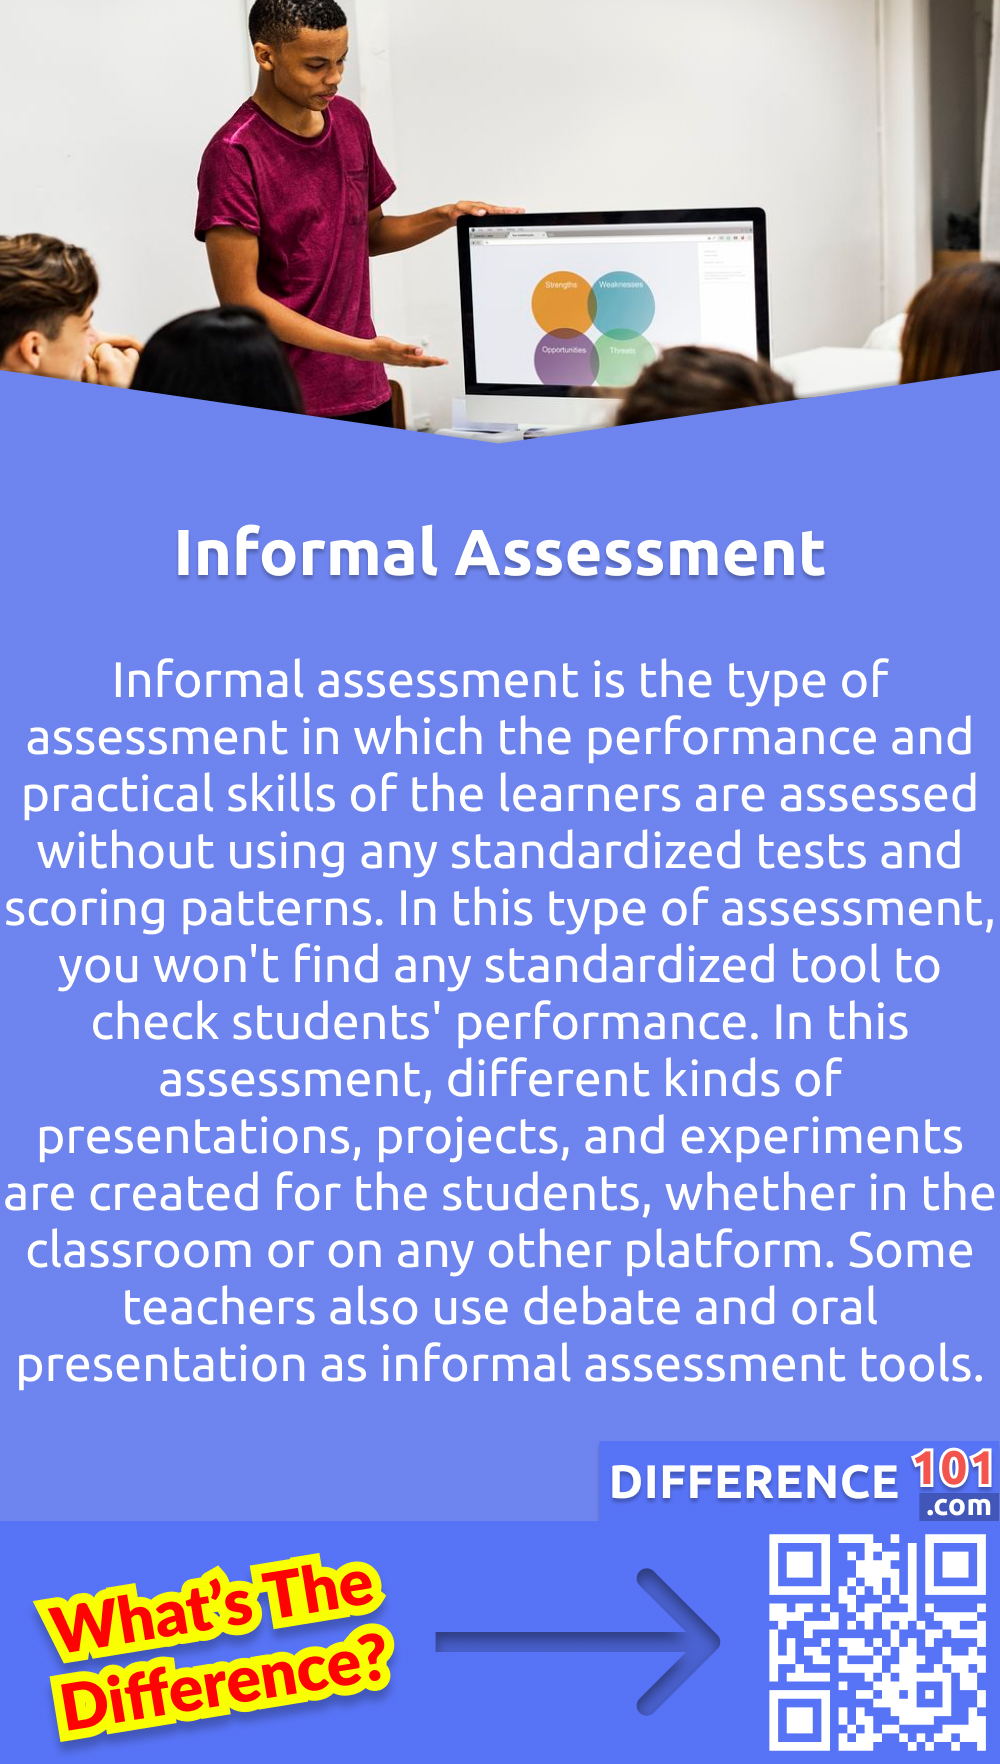 What Is Informal Assessment? Informal assessment is the type of assessment in which the performance and practical skills of the learners are assessed without using any standardized tests and scoring patterns. In this type of assessment, you won't find any standardized tool to check students' performance. In this assessment, different kinds of presentations, projects, and experiments are created for the students, whether in the classroom or on any other platform. Some teachers also use debate and oral presentation as informal assessment tools. Some also consider debating and peer teaching as examples of informal assessments. Another way is to make a presentation or ask some question that a student has to answer in front of the whole class.